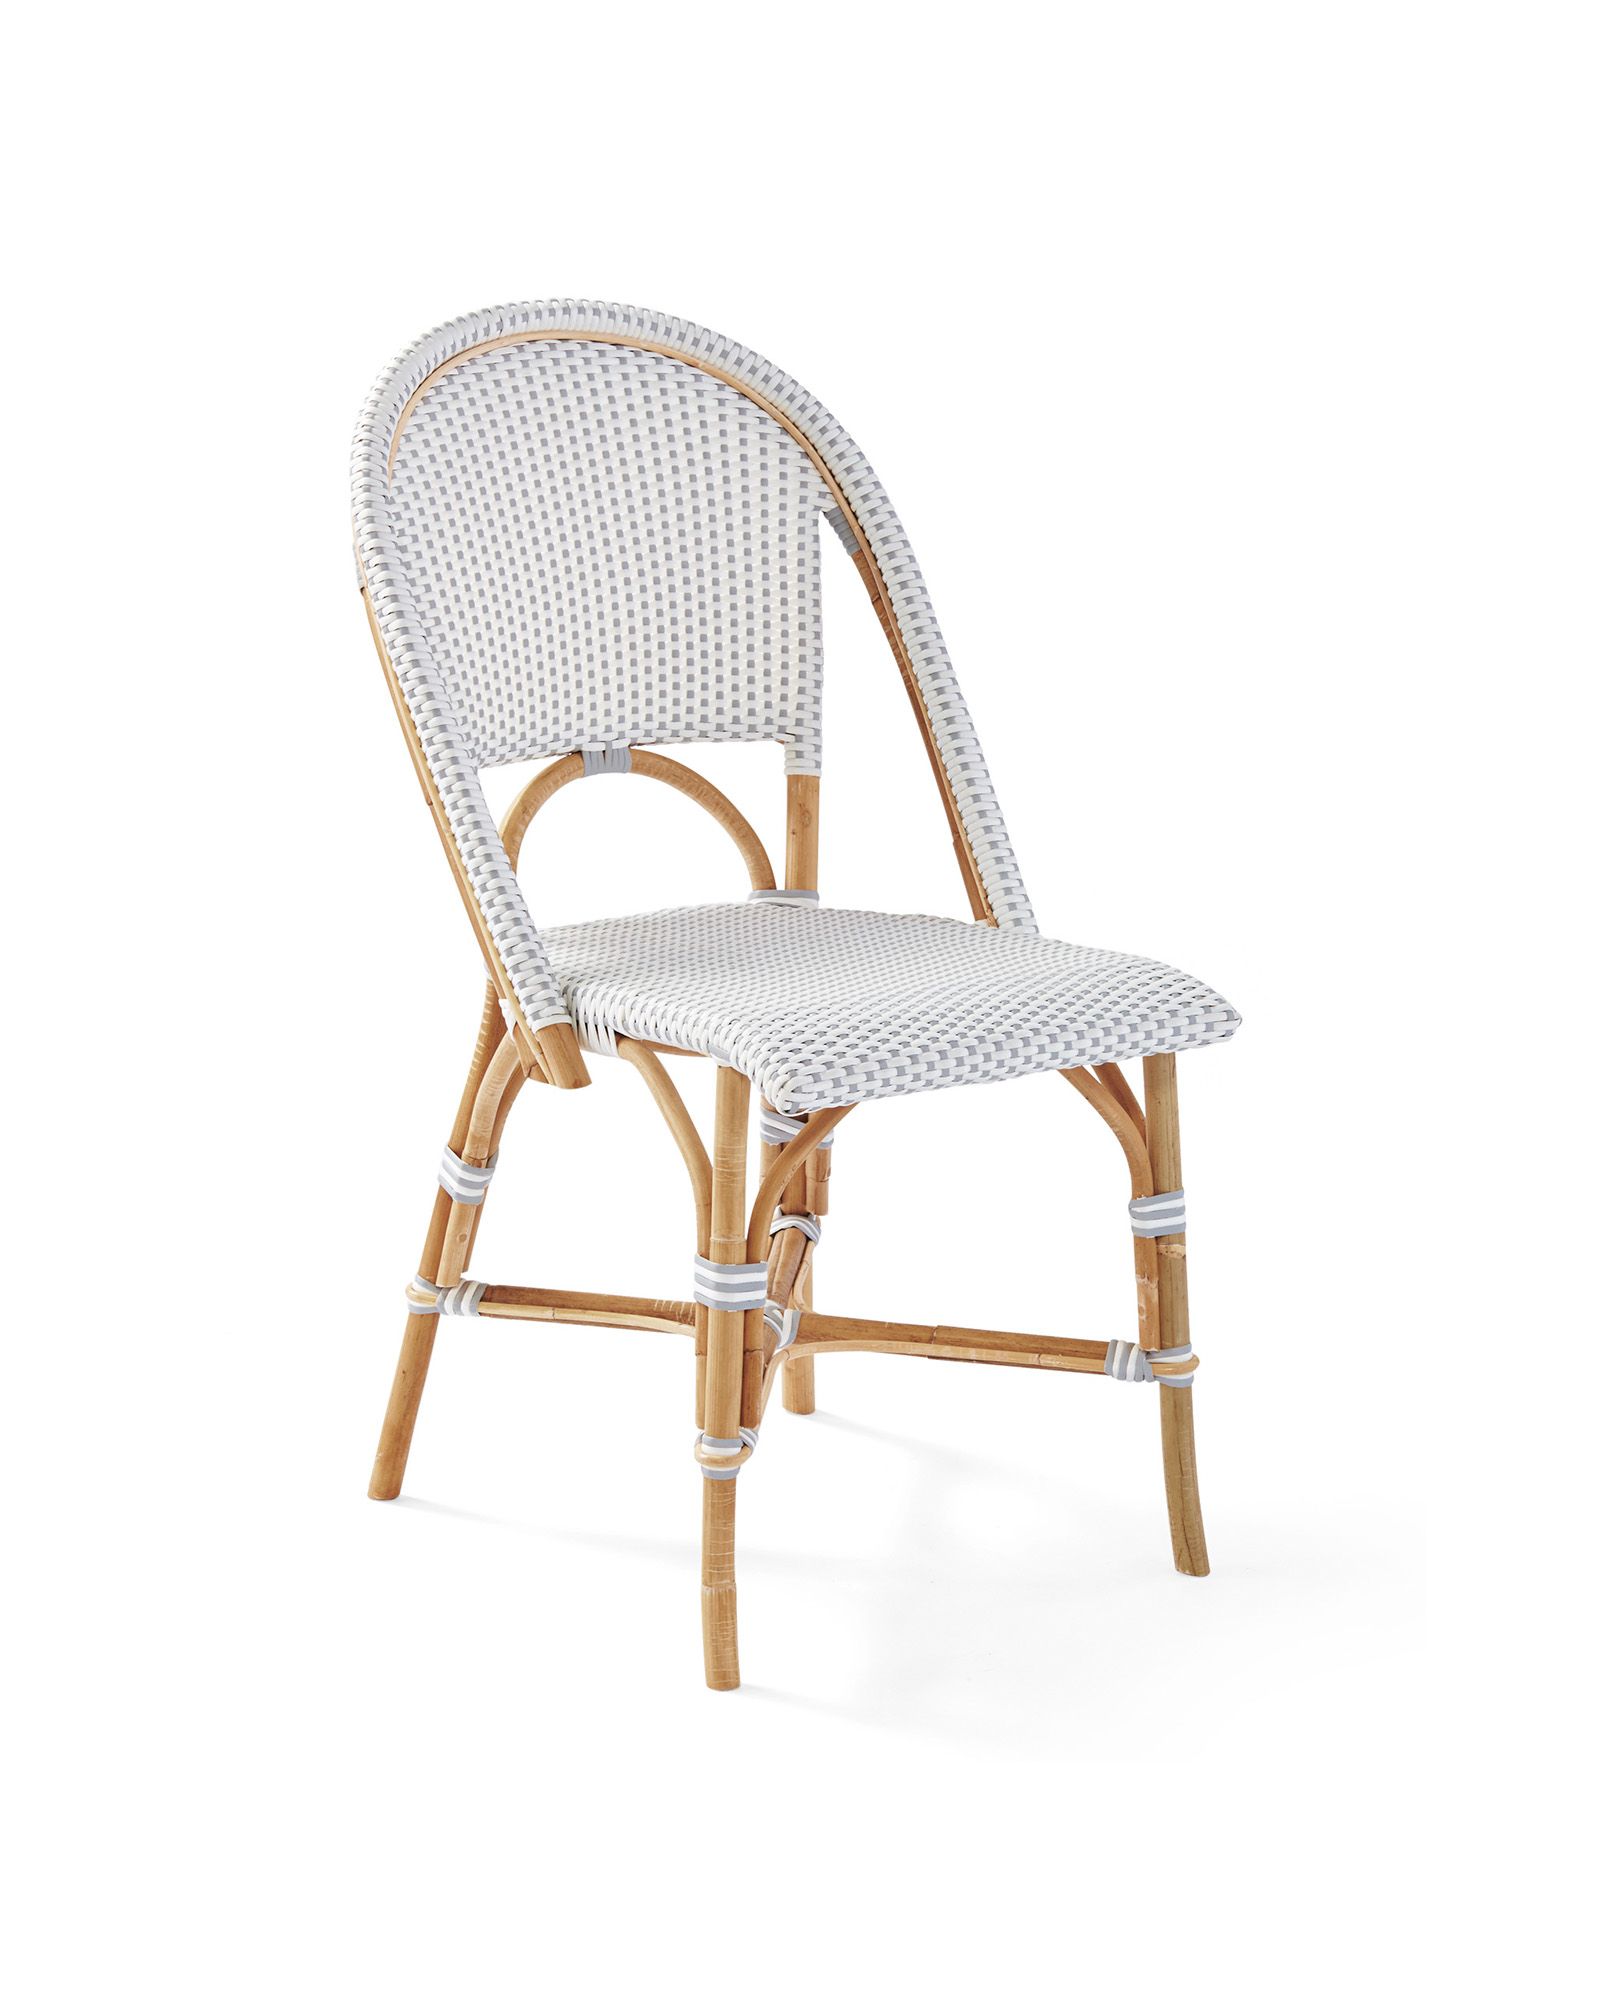 Riviera Side Chair | Serena and Lily